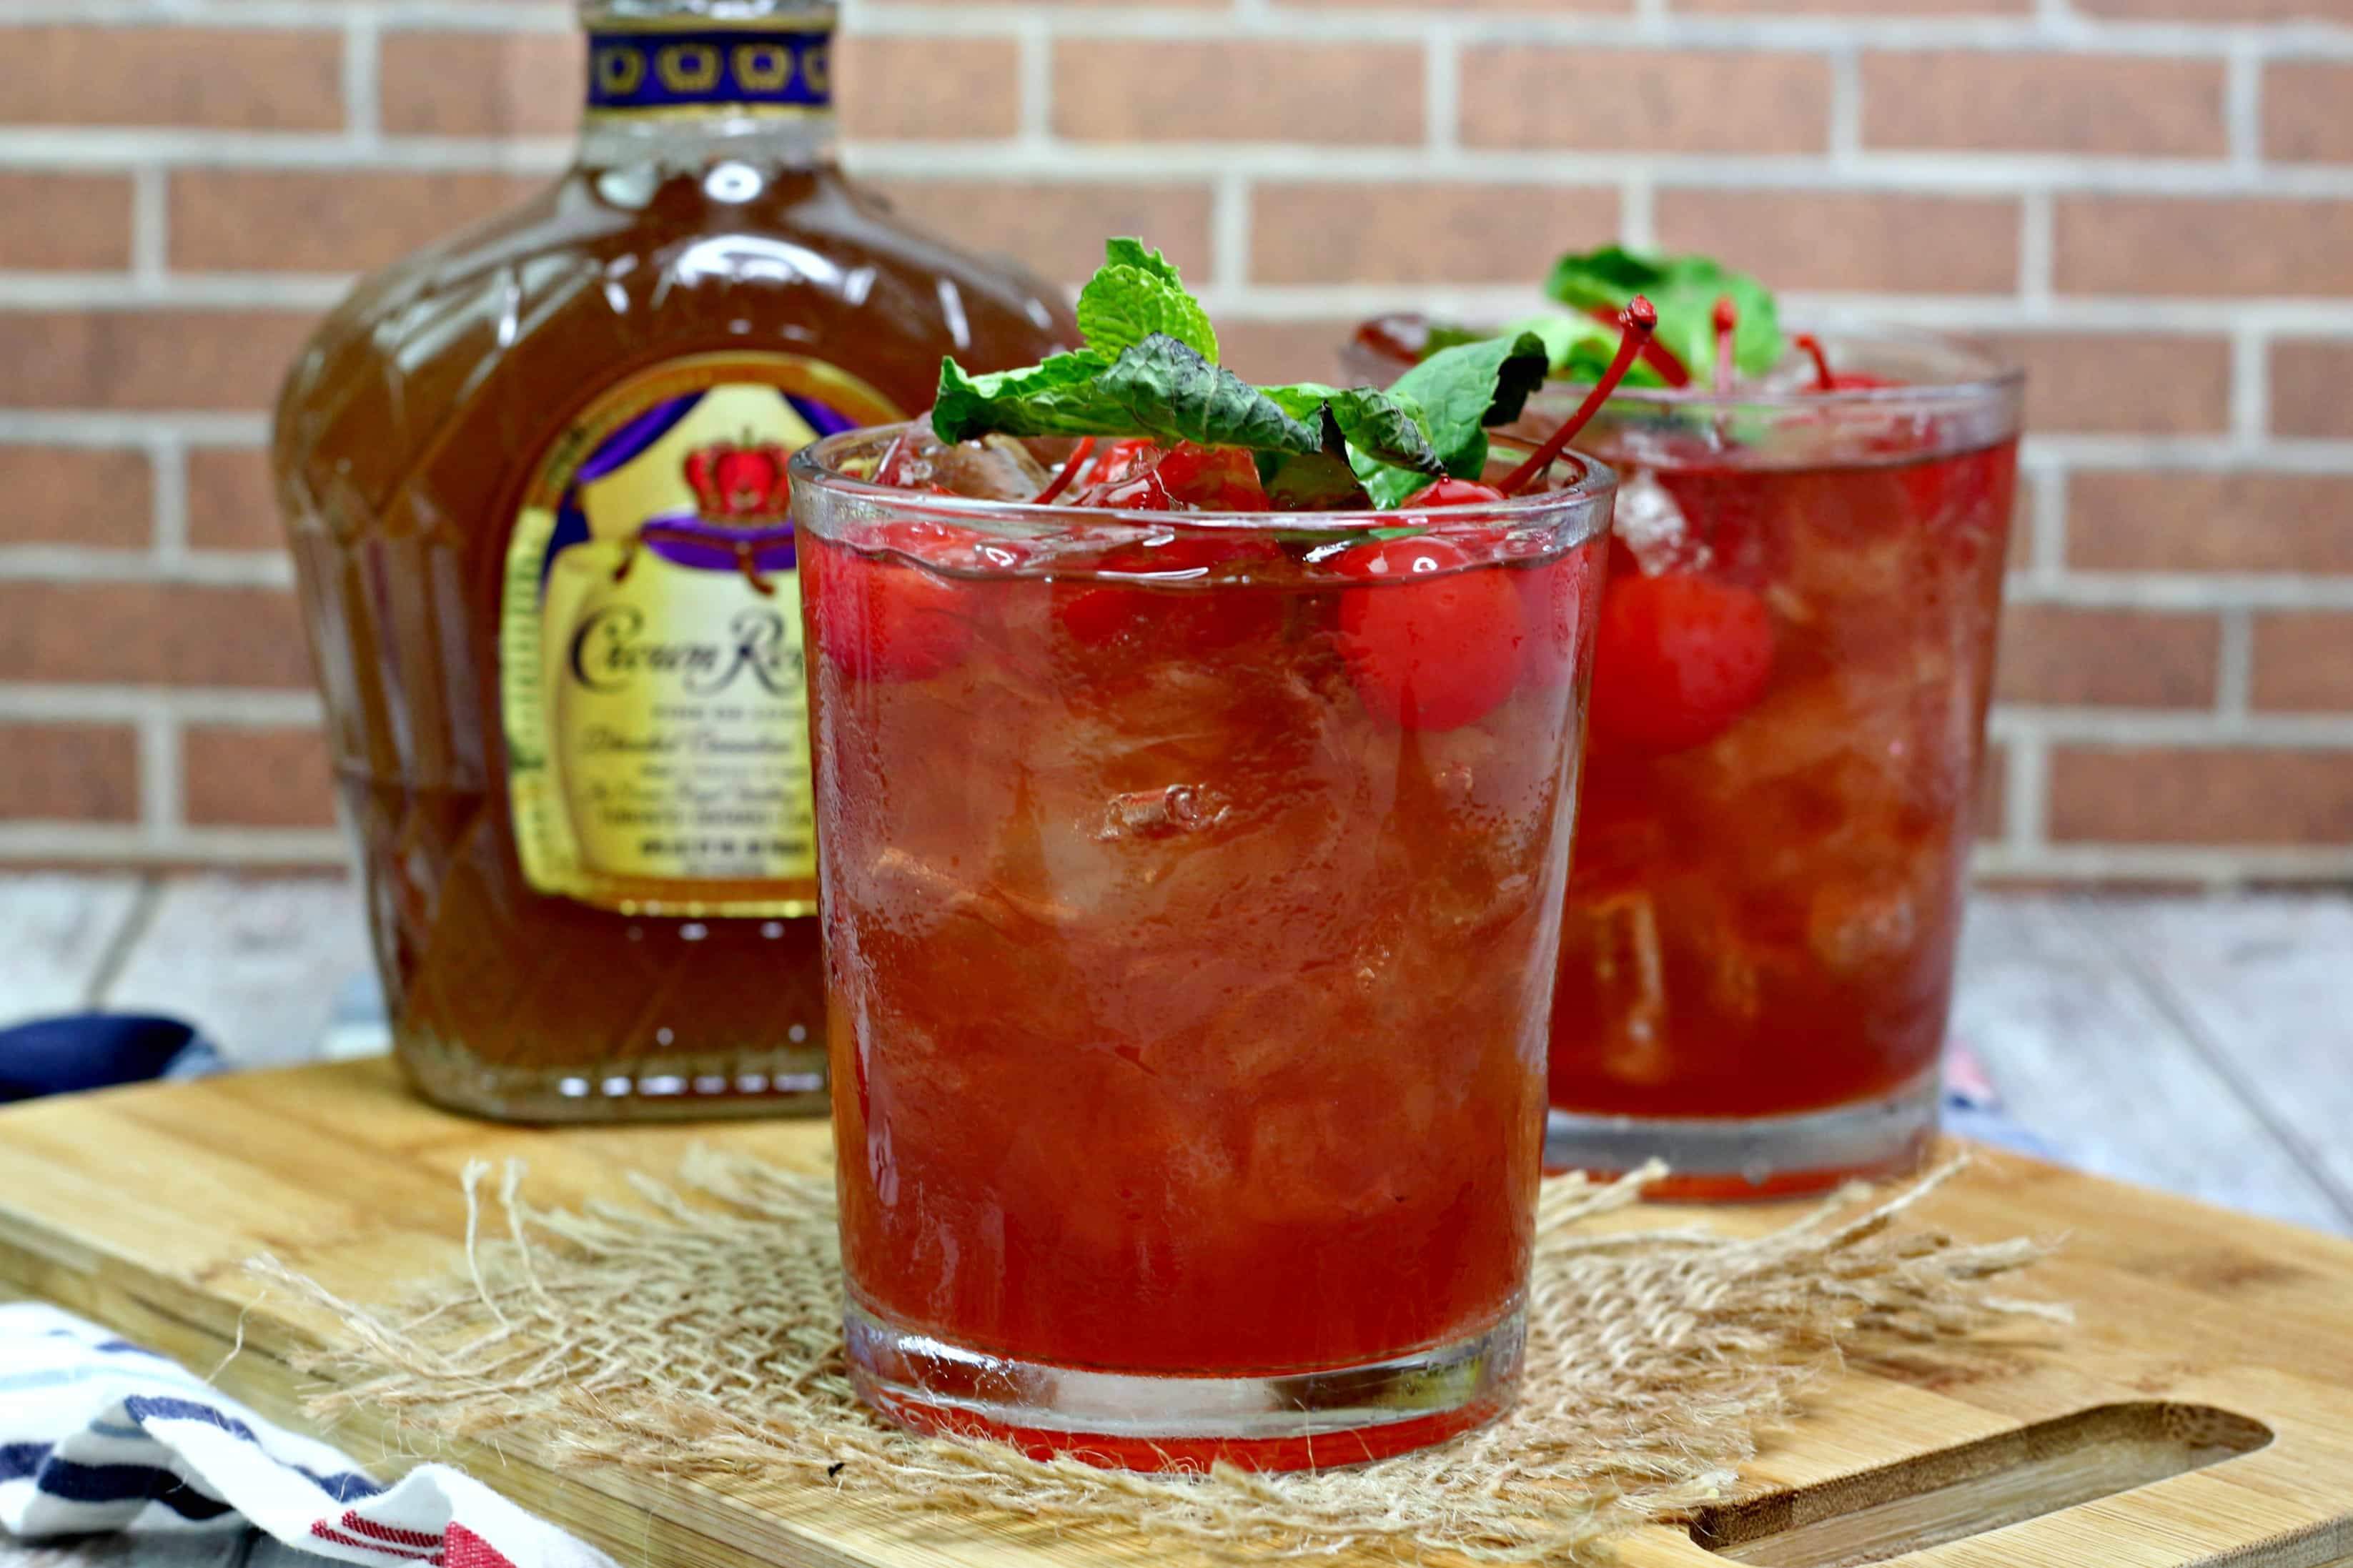 Whisky Cherry Coke Smash made with Crown Royal